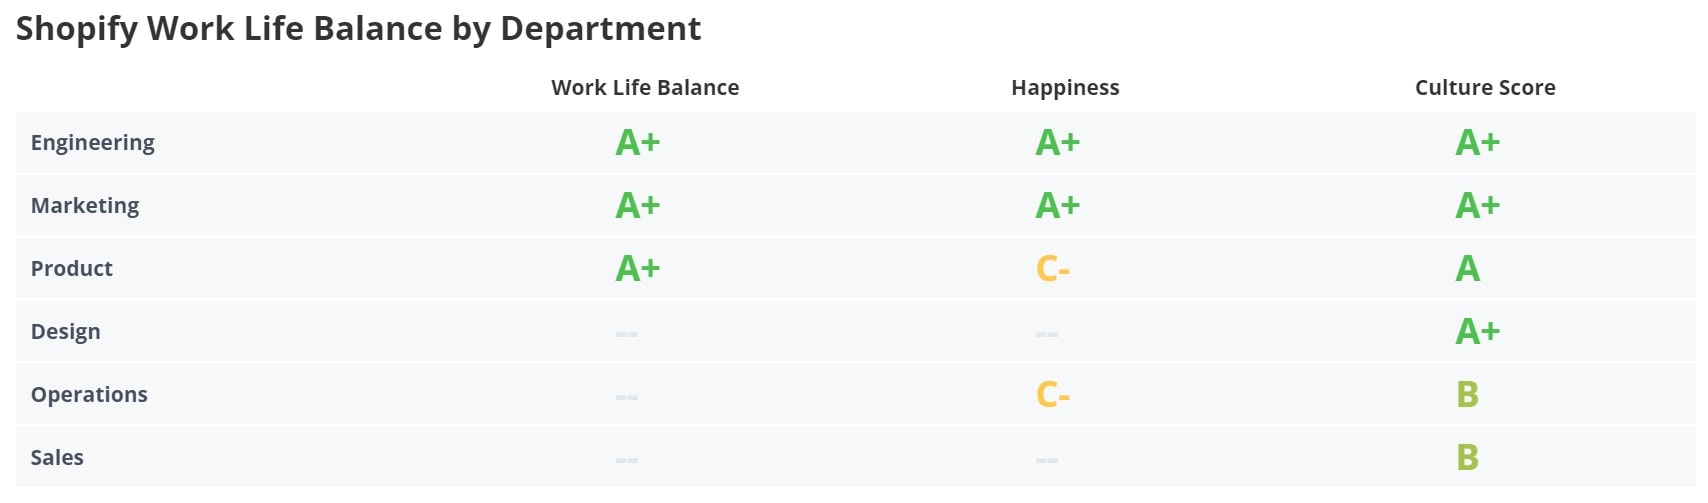 Shopify Work-Life Balance by Deparment